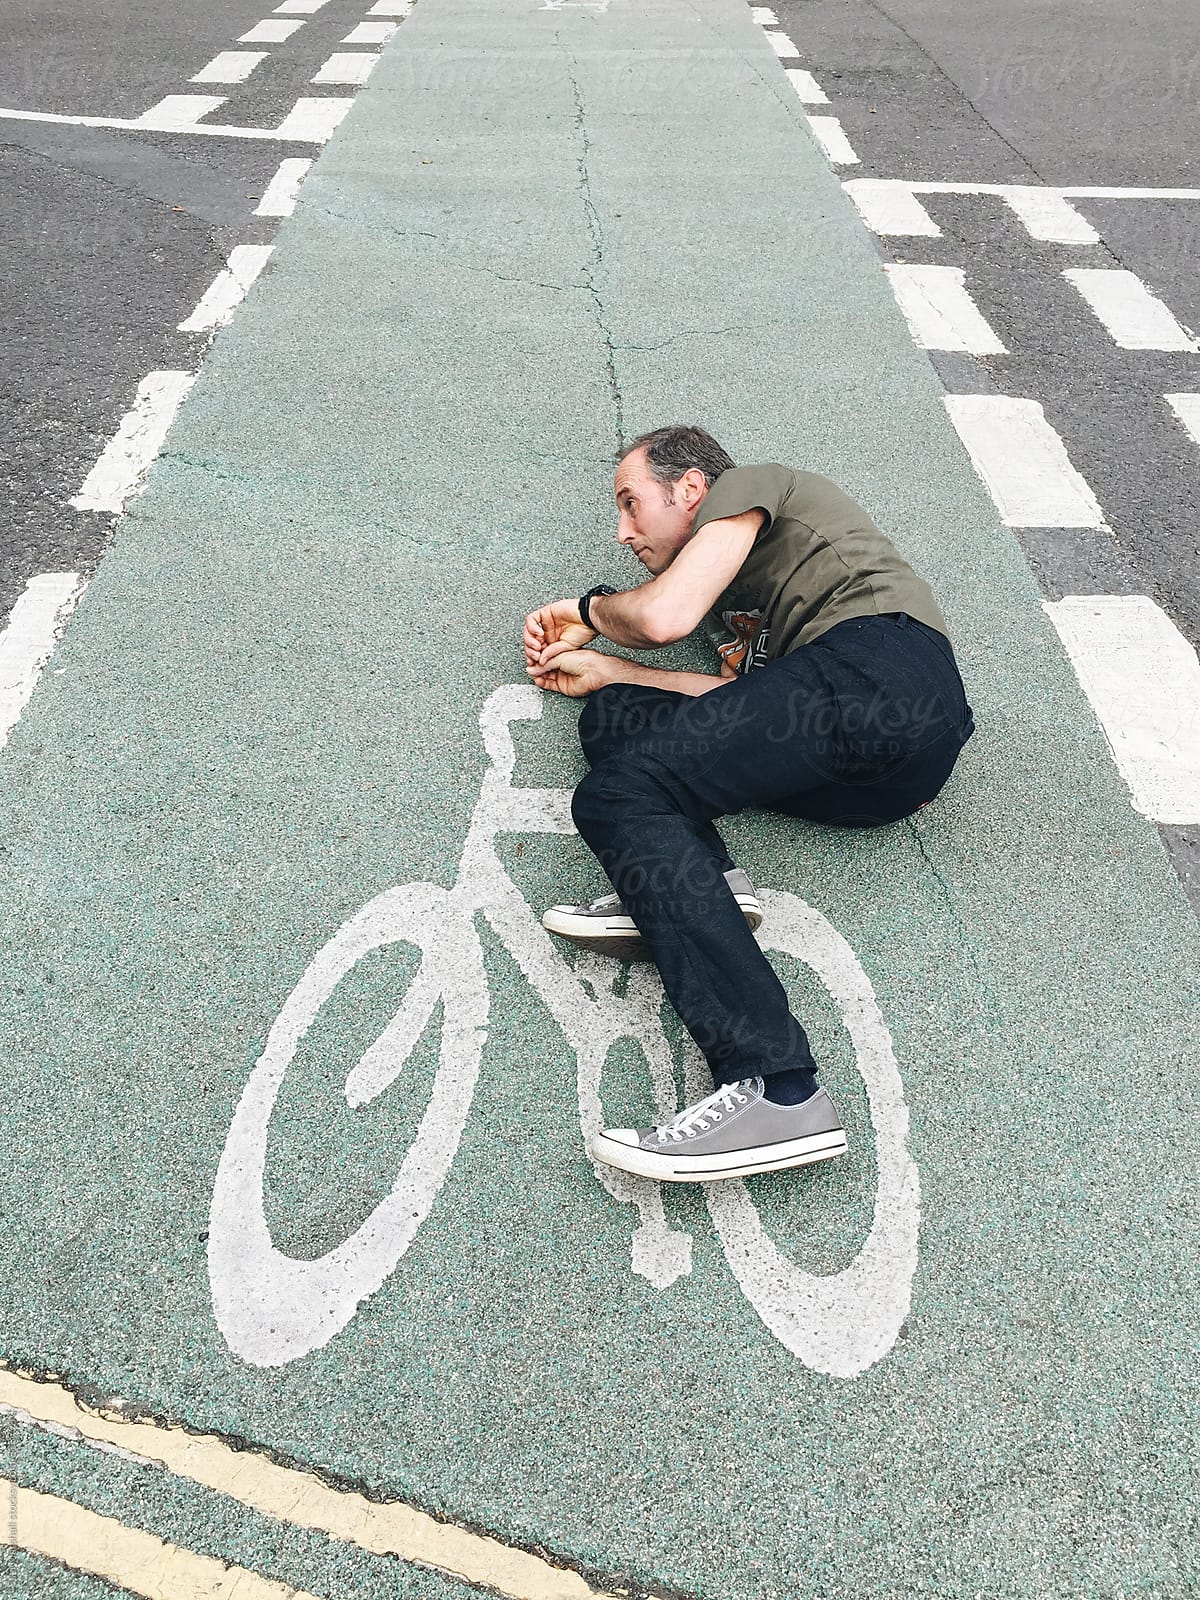 Man lying on tarmac pretending to ride a bicycle that is painted on the road